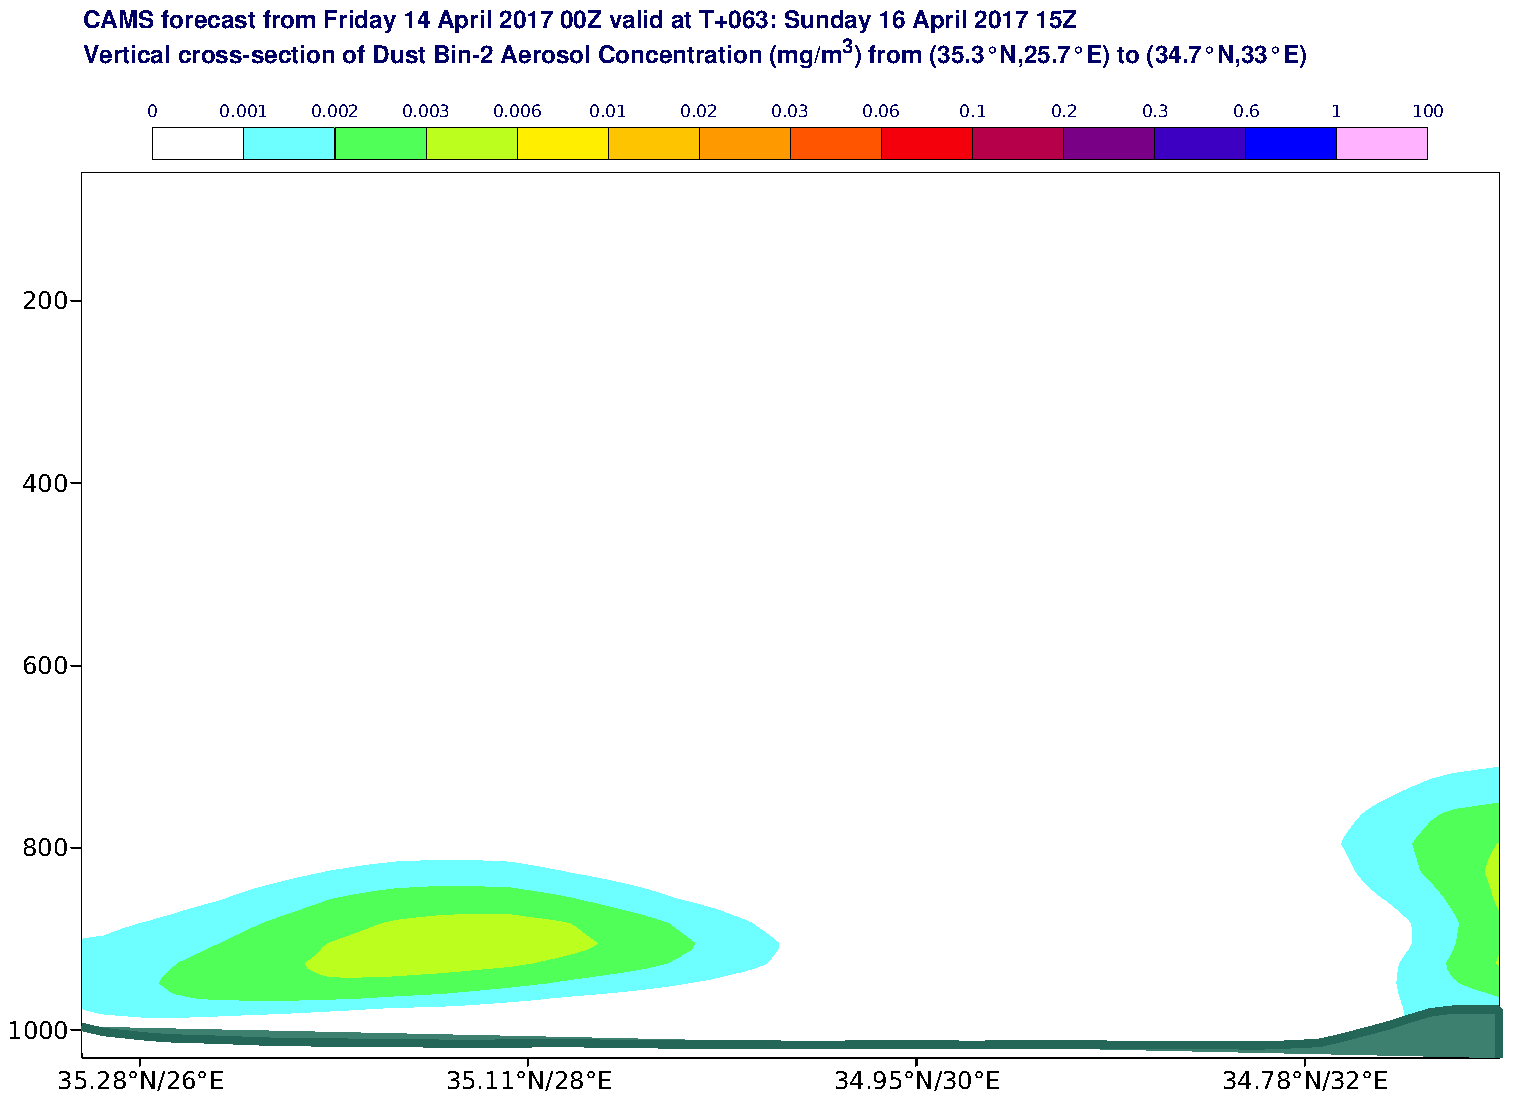 Vertical cross-section of Dust Bin-2 Aerosol Concentration (mg/m3) valid at T63 - 2017-04-16 15:00